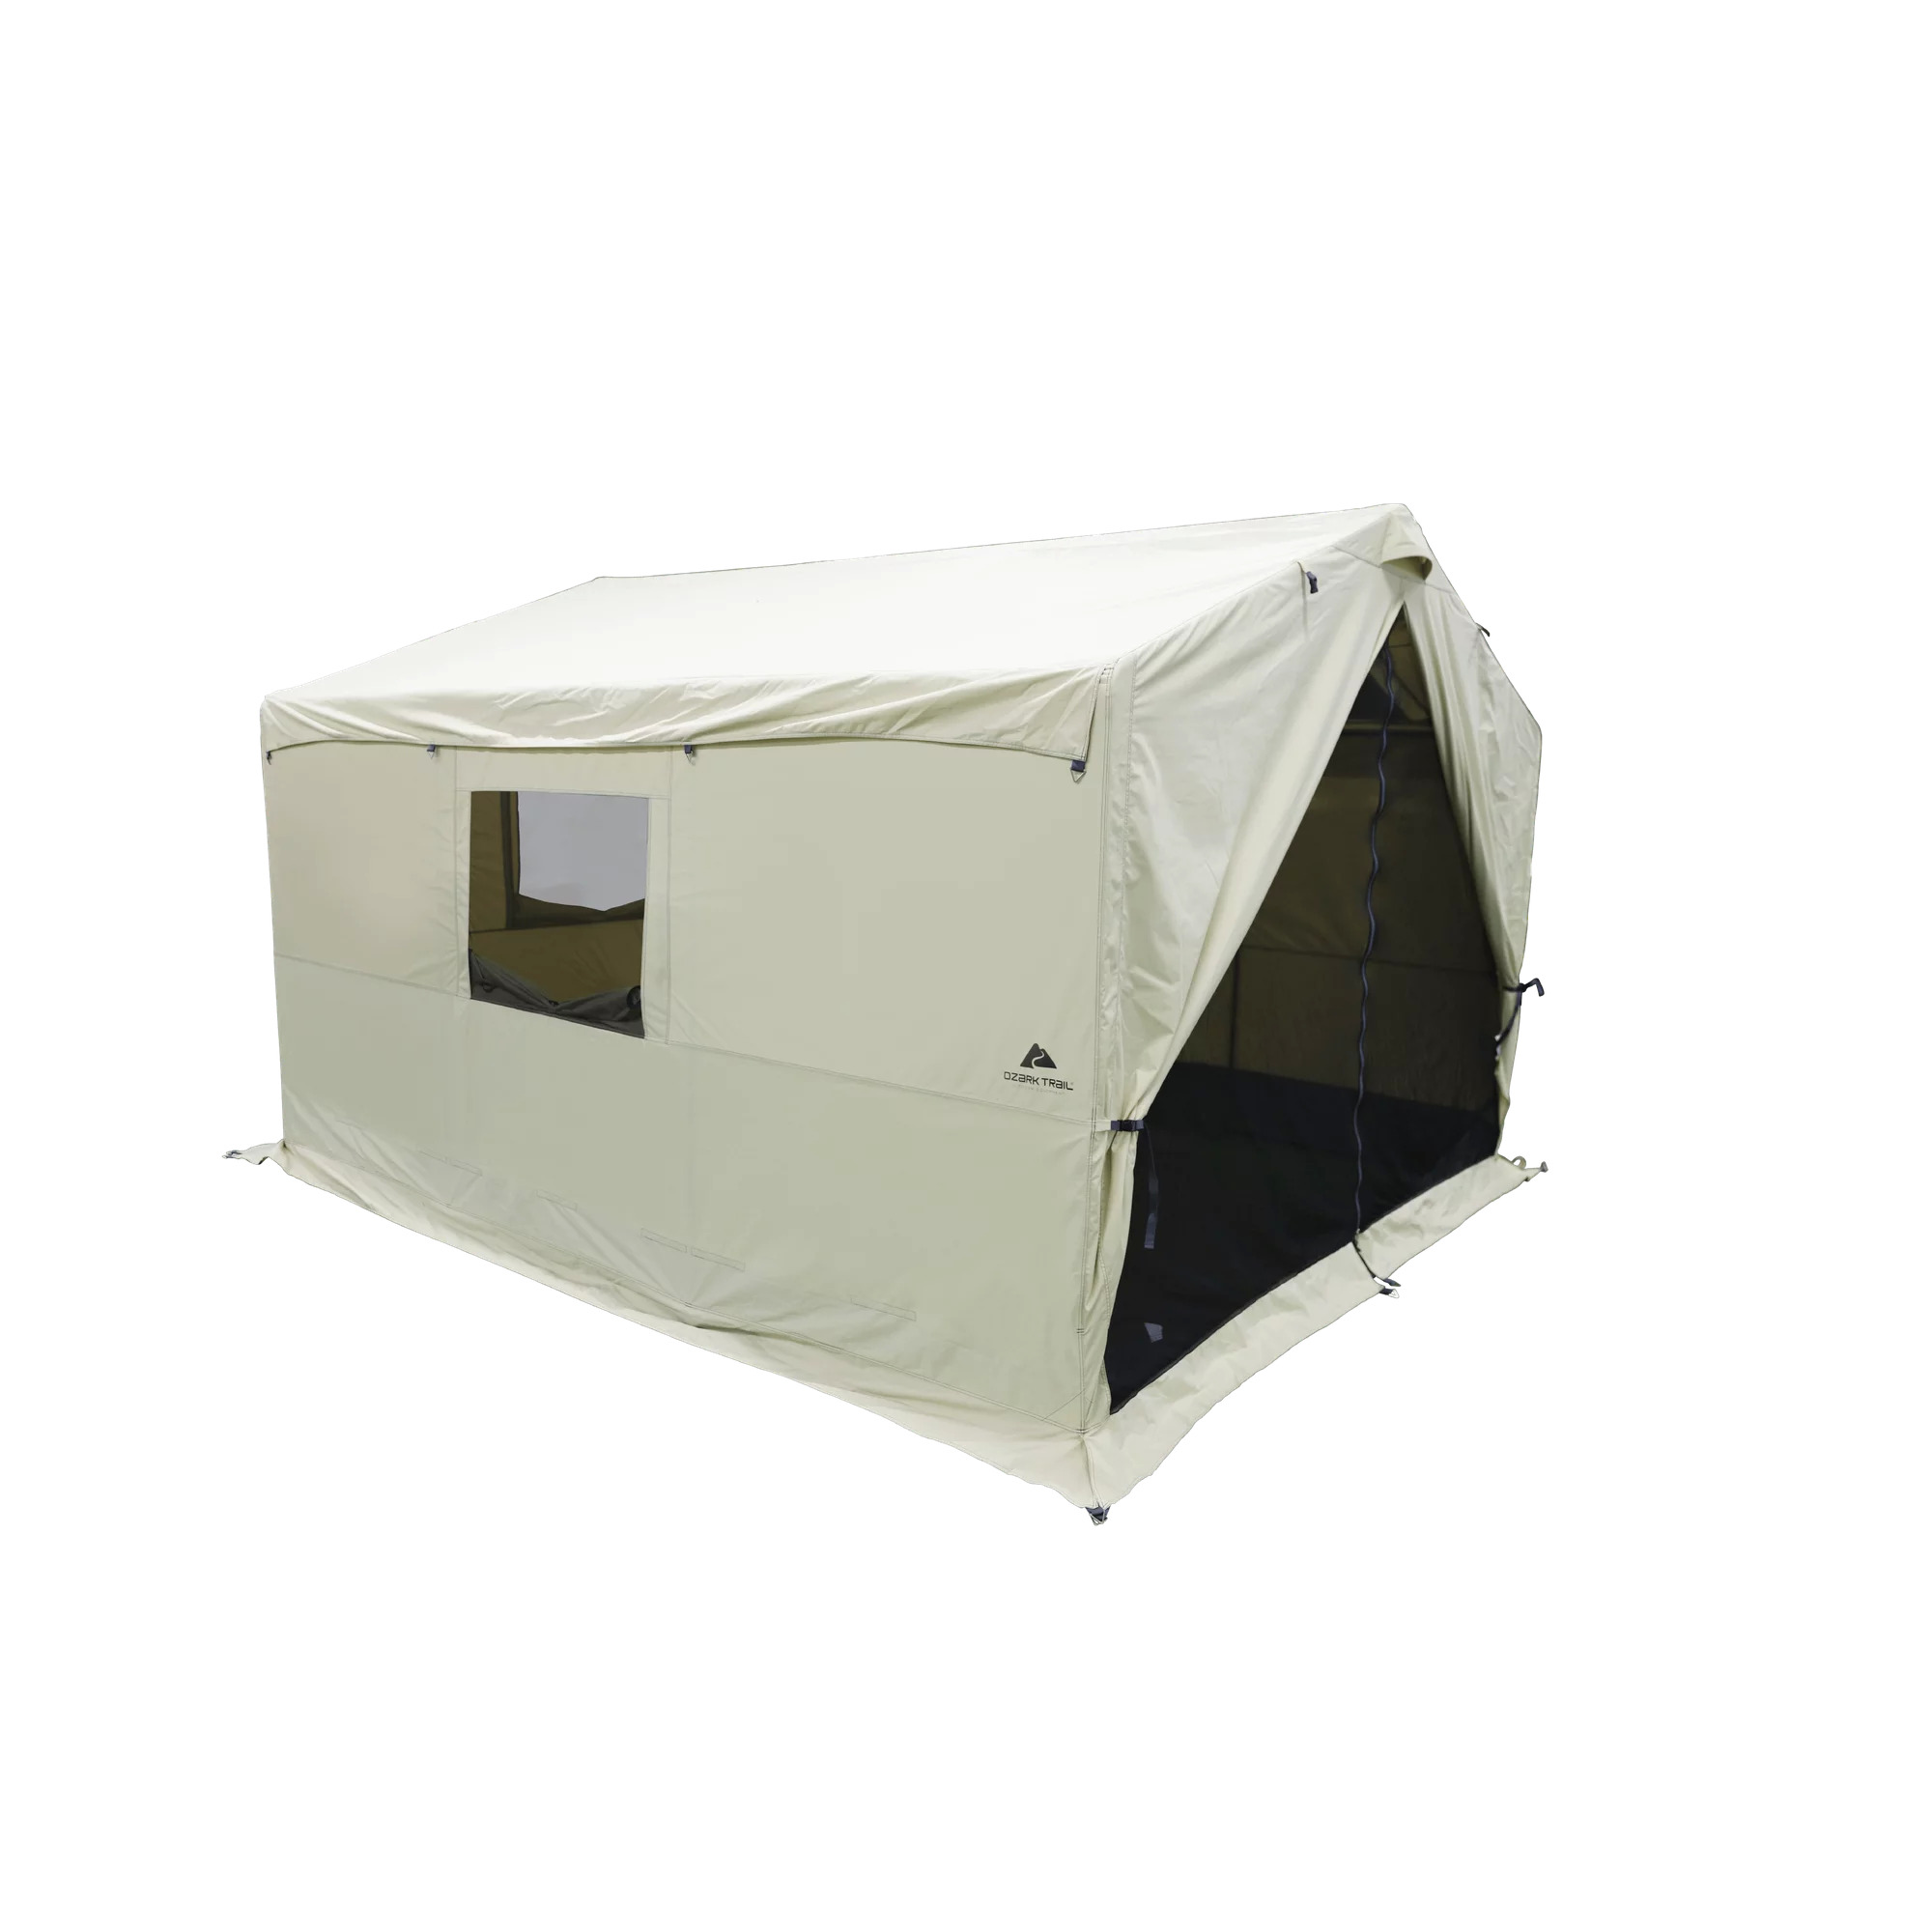 6-Person 12' x 10' Ozark Trail North Fork Outdoor Wall Tent with Stove Jack $249.00 + Free Shipping